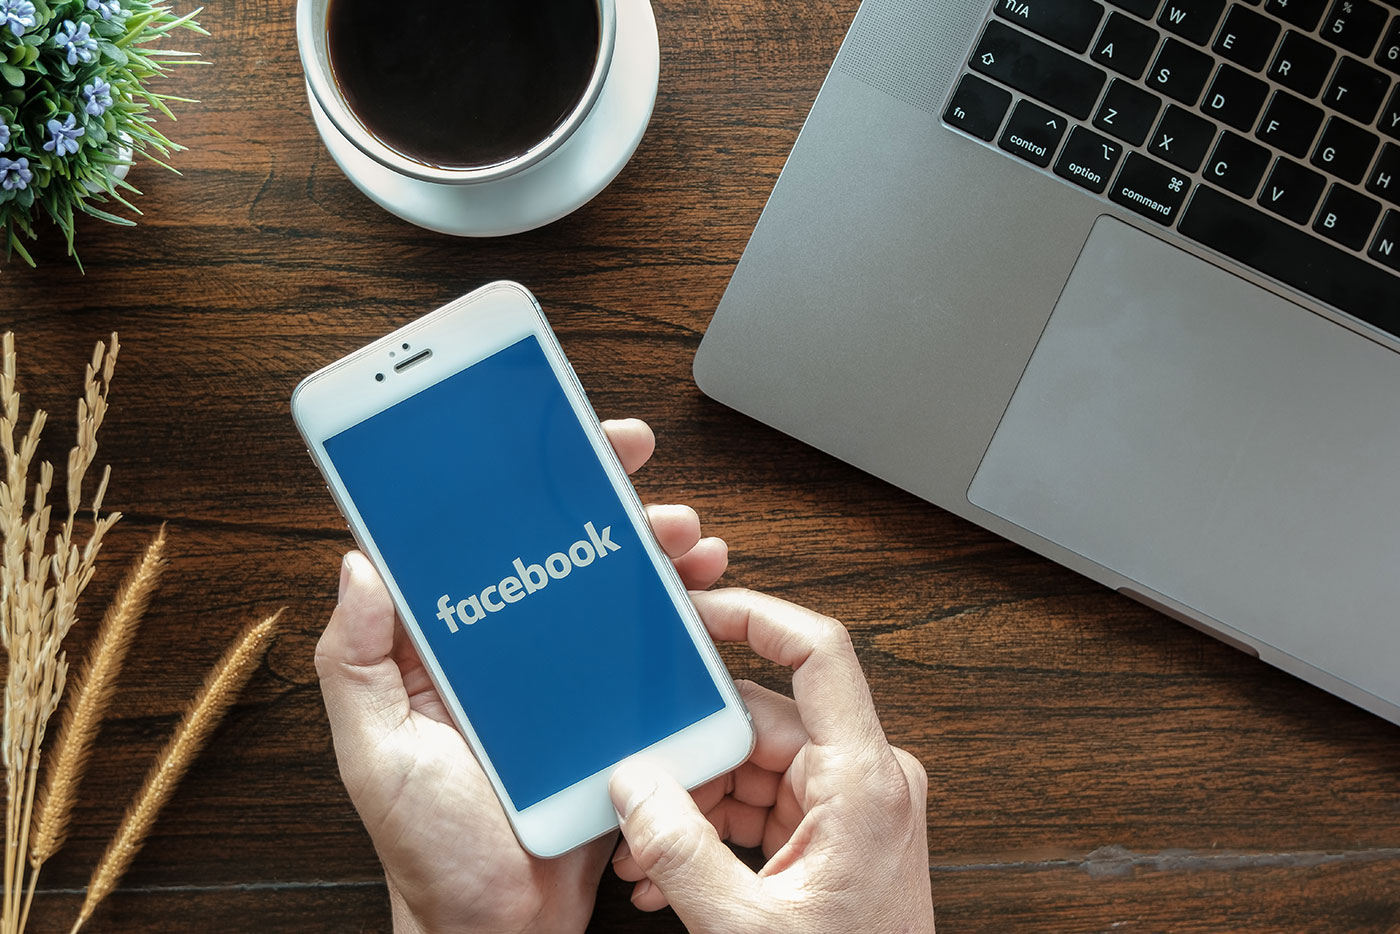 What is Workplace by Facebook and How to Use it Effectively